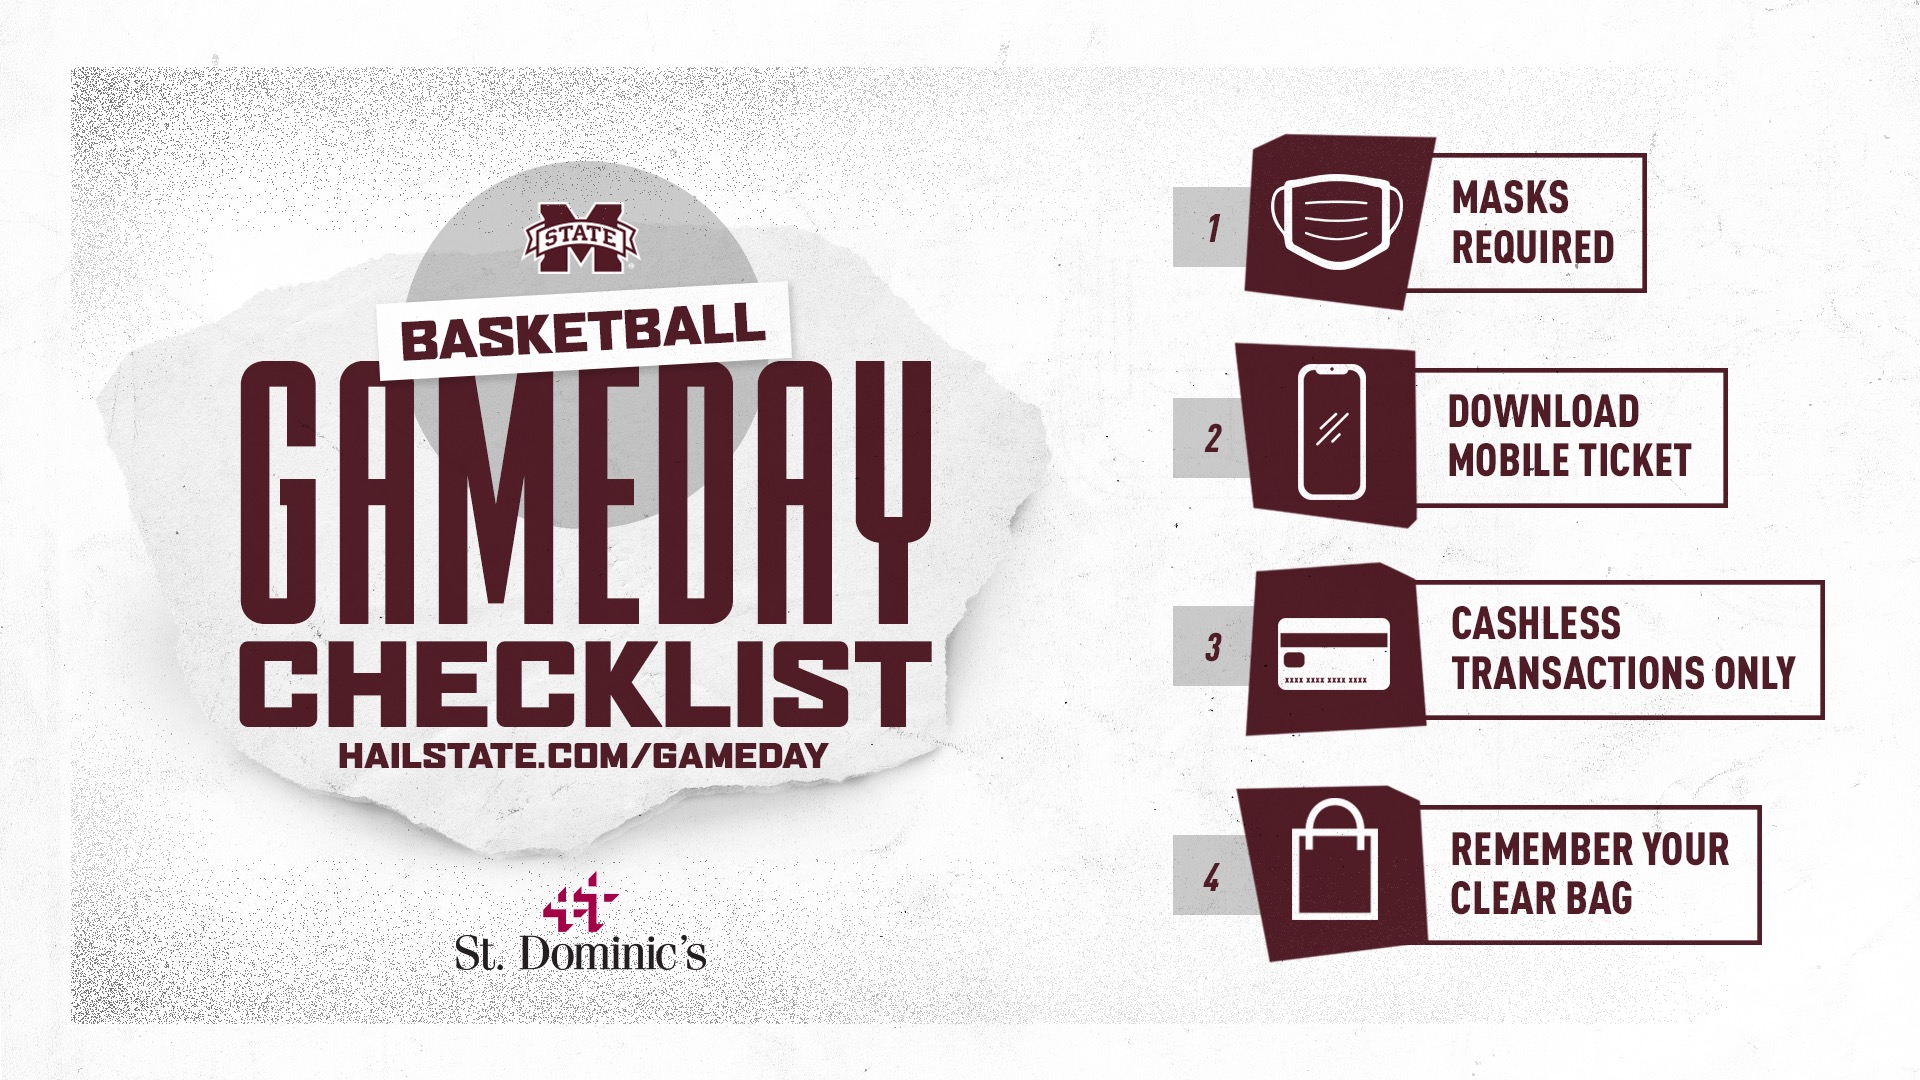 Maroon, white and gray graphic reminding MSU basketball fans about face masks, mobile tickets, cashless transactions, gate entry and clear bag policy